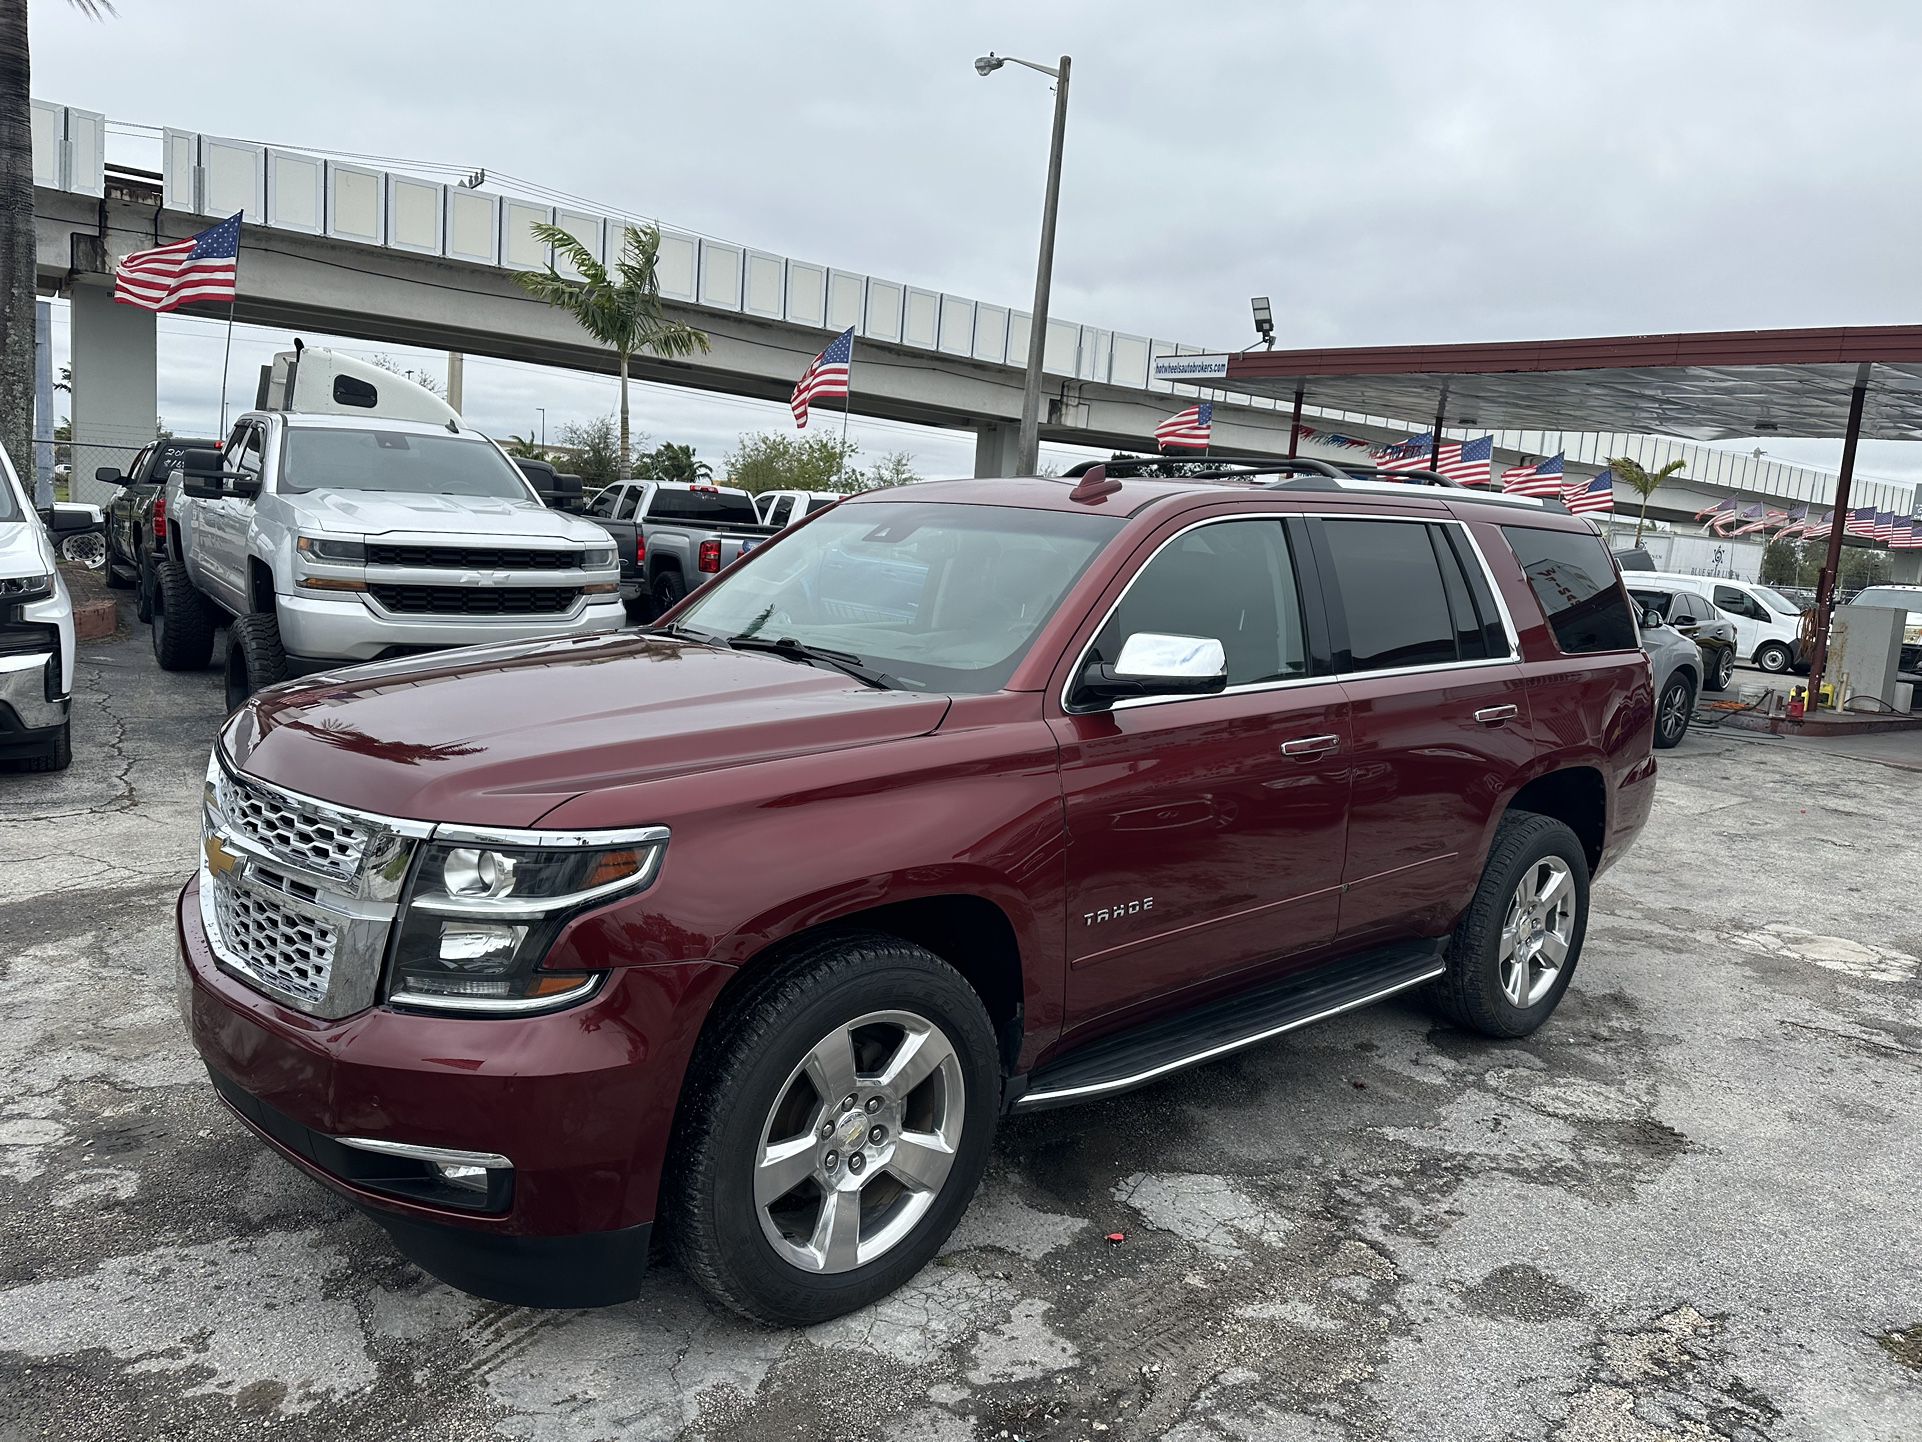 used 2017 Chevy Tahoe - front view 3